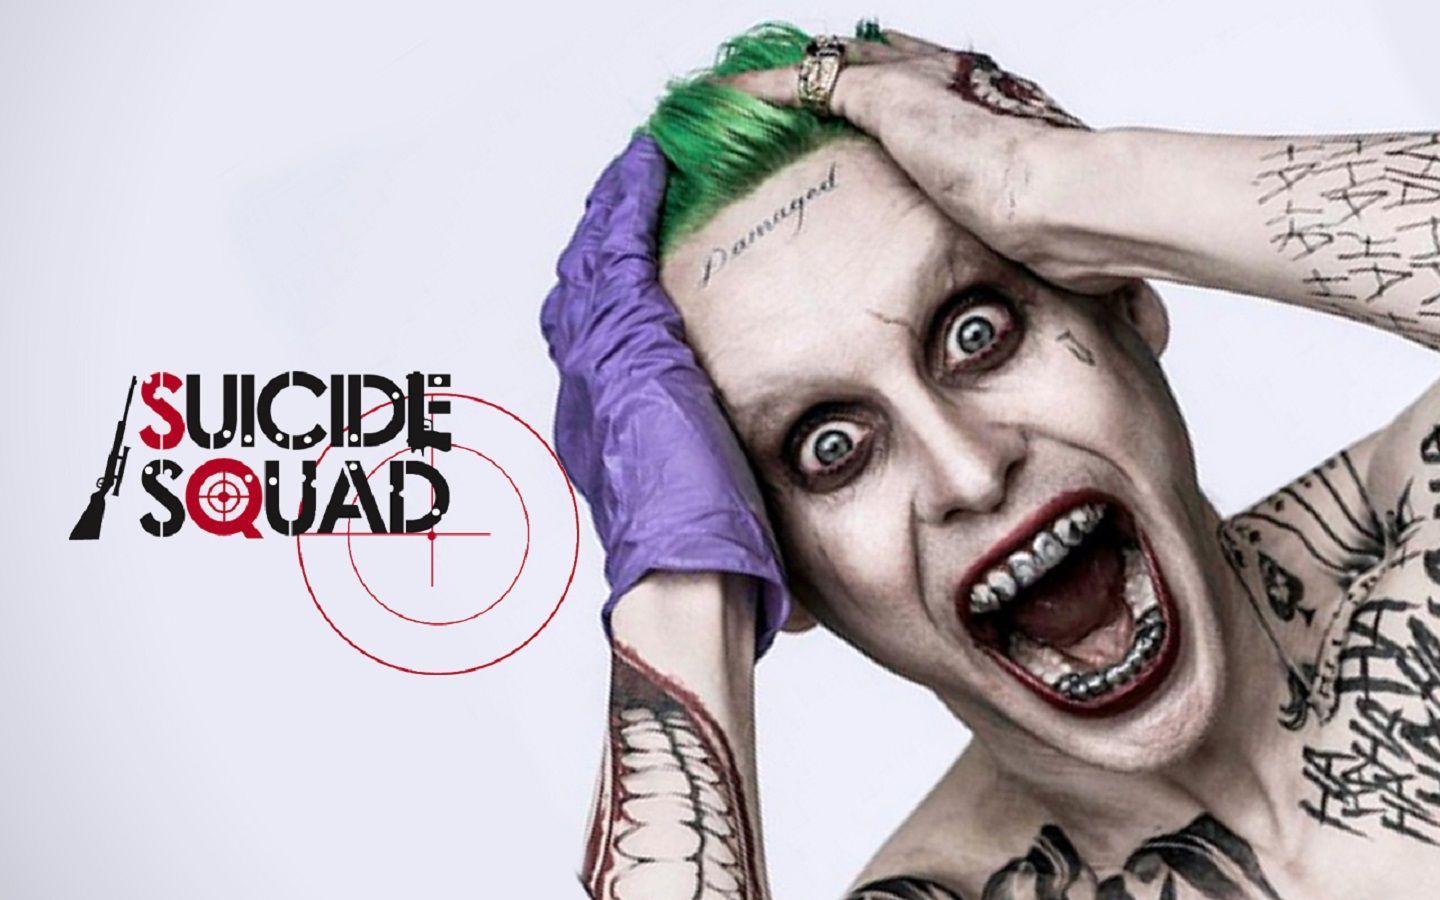 Suicide Squad HD wallpapers * PoPoPics.